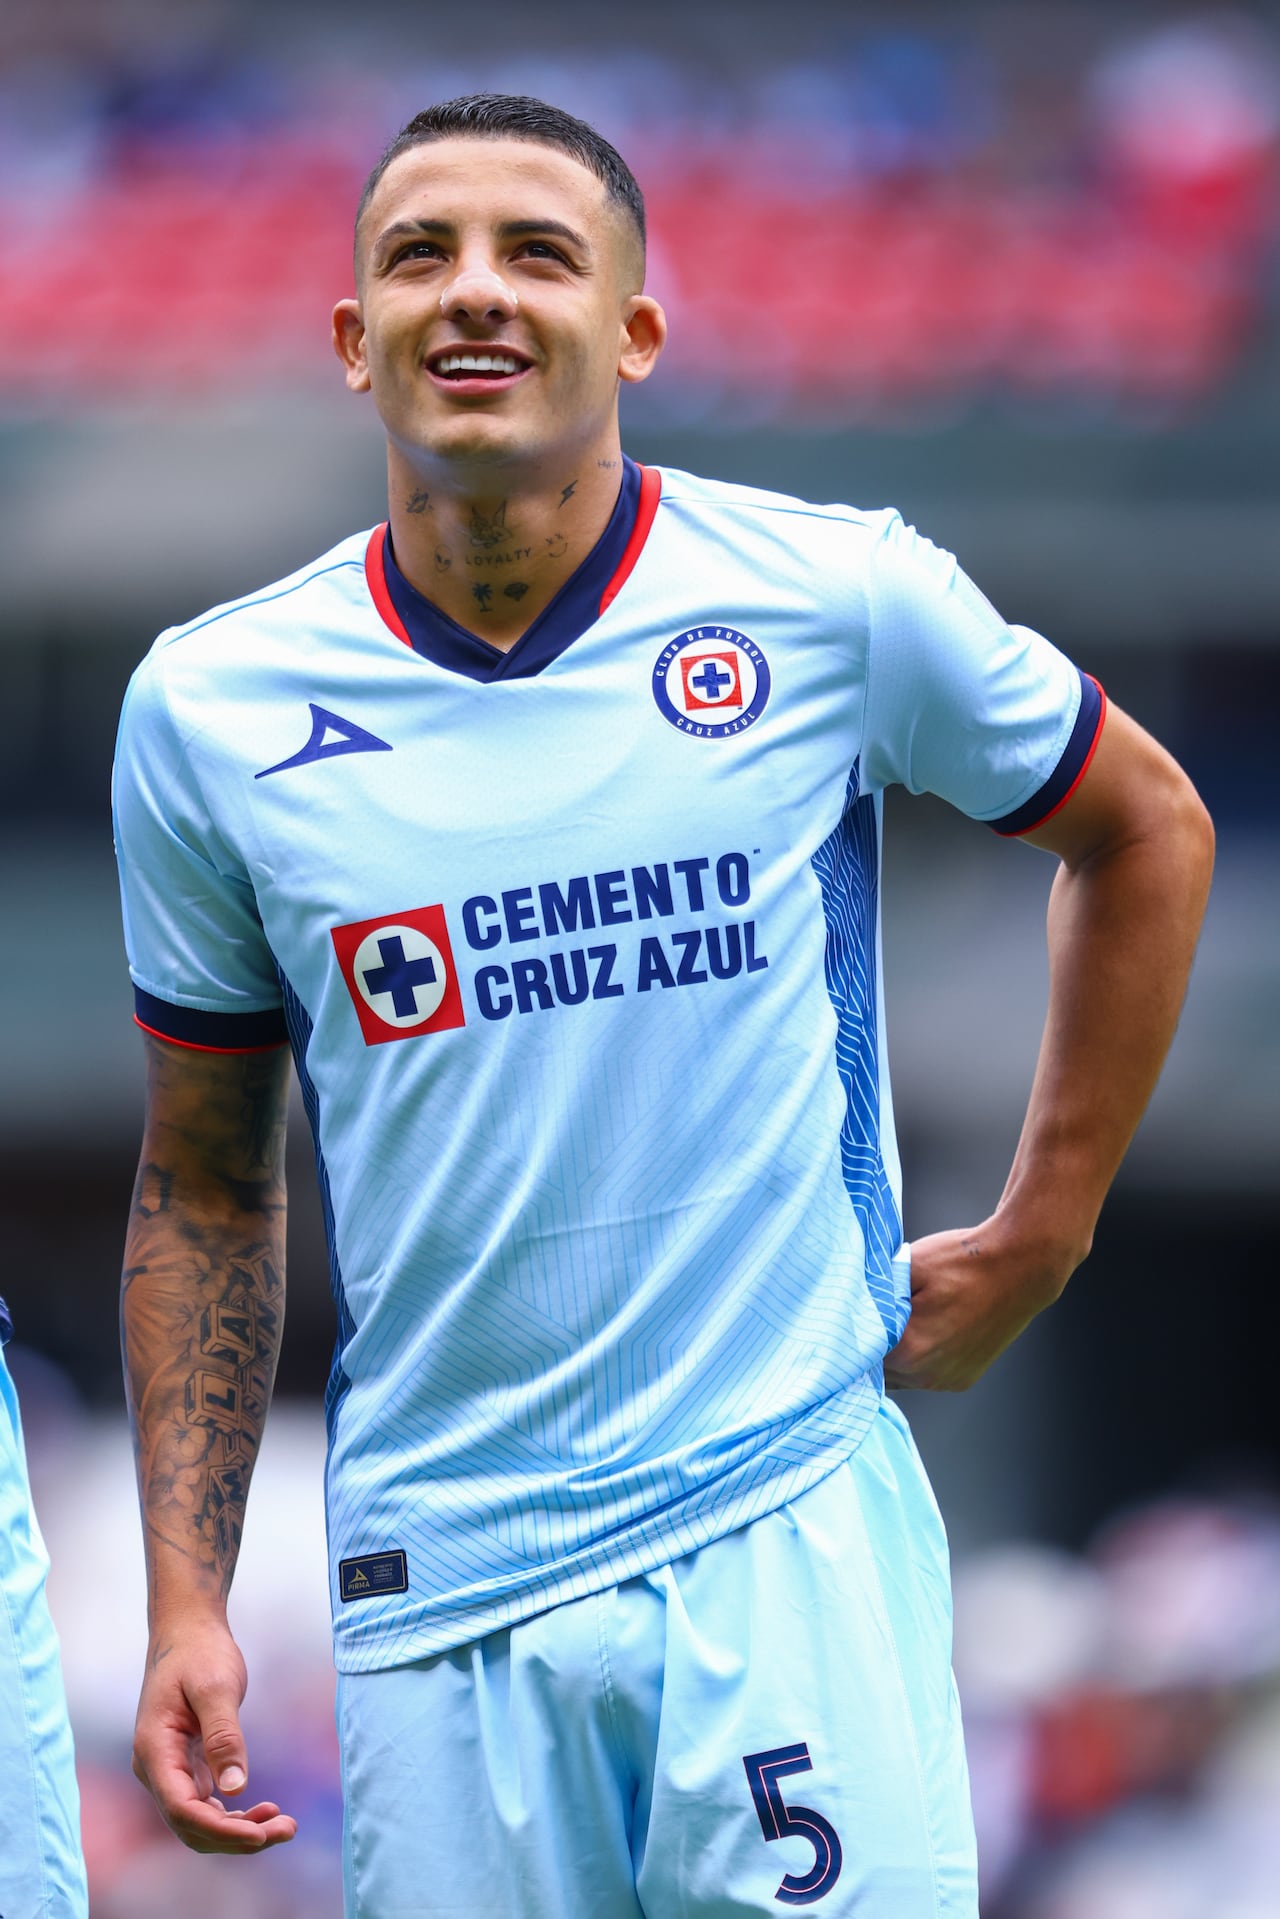 MEXICO CITY, MEXICO - AUGUST 20: Kevin Castaño of Cruz Azul looks on during the 4th round match between Cruz Azul and Santos Laguna as part of the Torneo Apertura 2023 Liga MX at Azteca Stadium on August 20, 2023 in Mexico City, Mexico. (Photo by Agustin Cuevas/Getty Images)